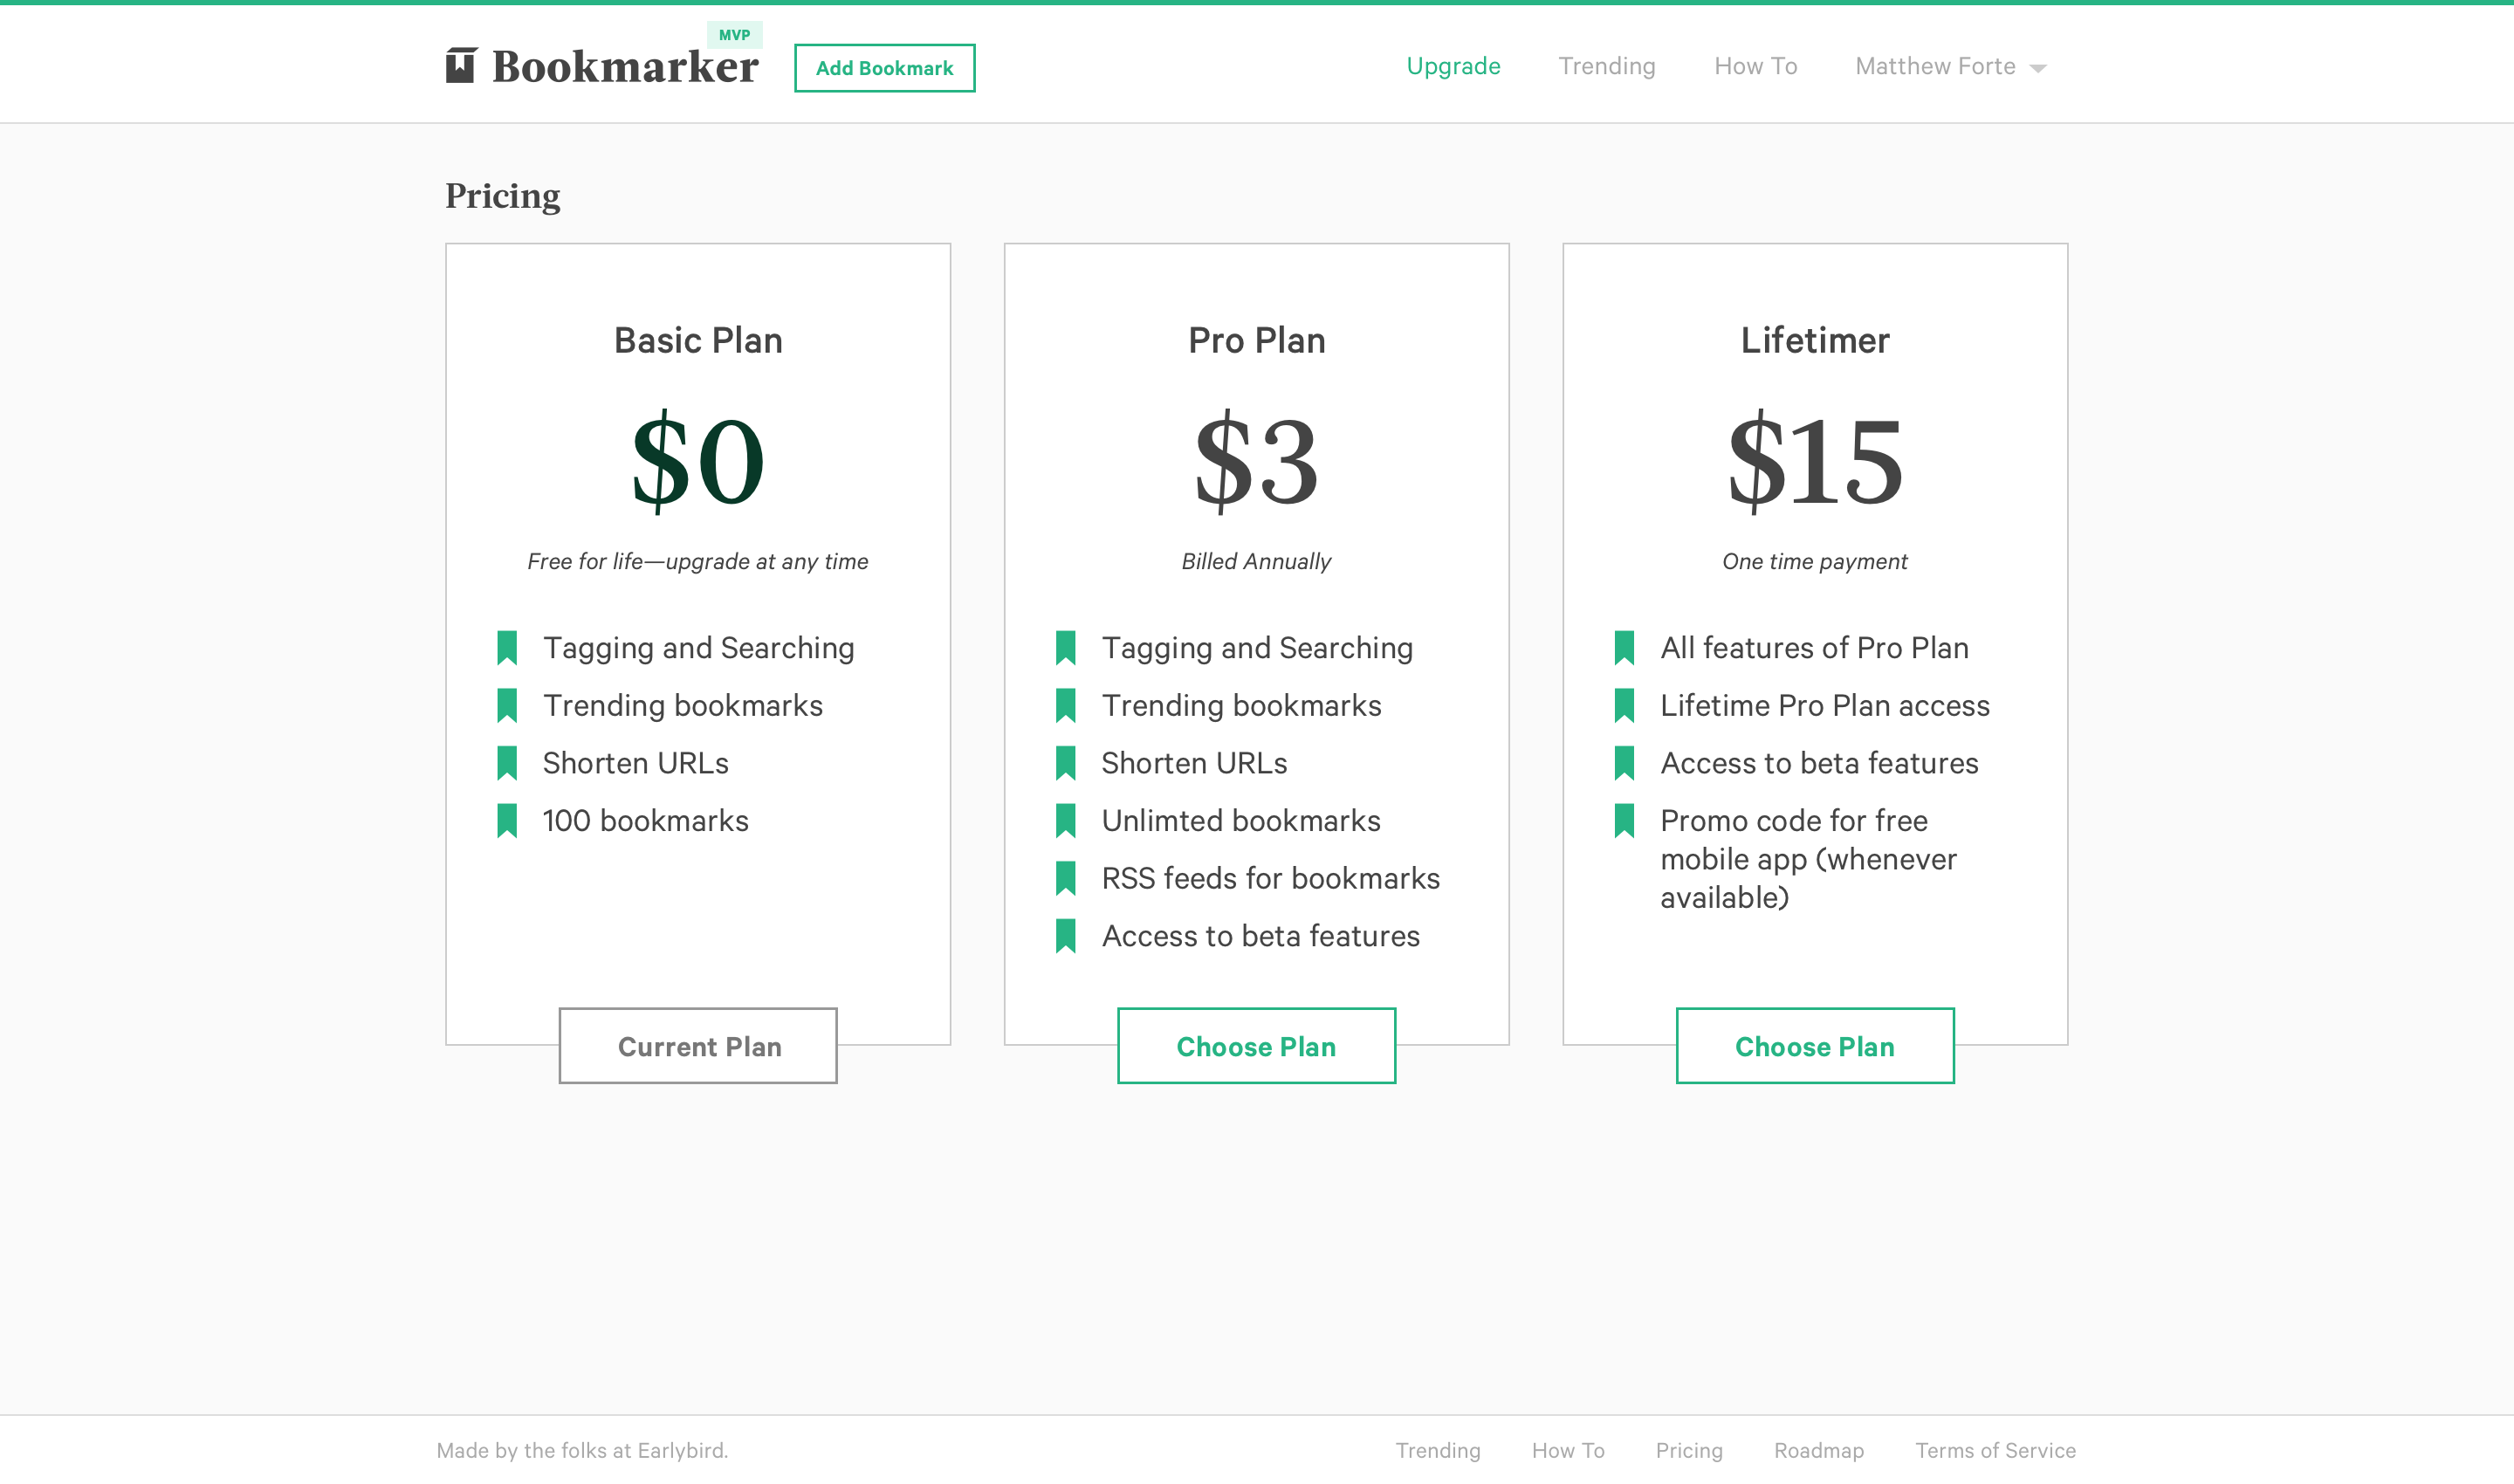 Screenshot of the pricing screen for Bookmarker